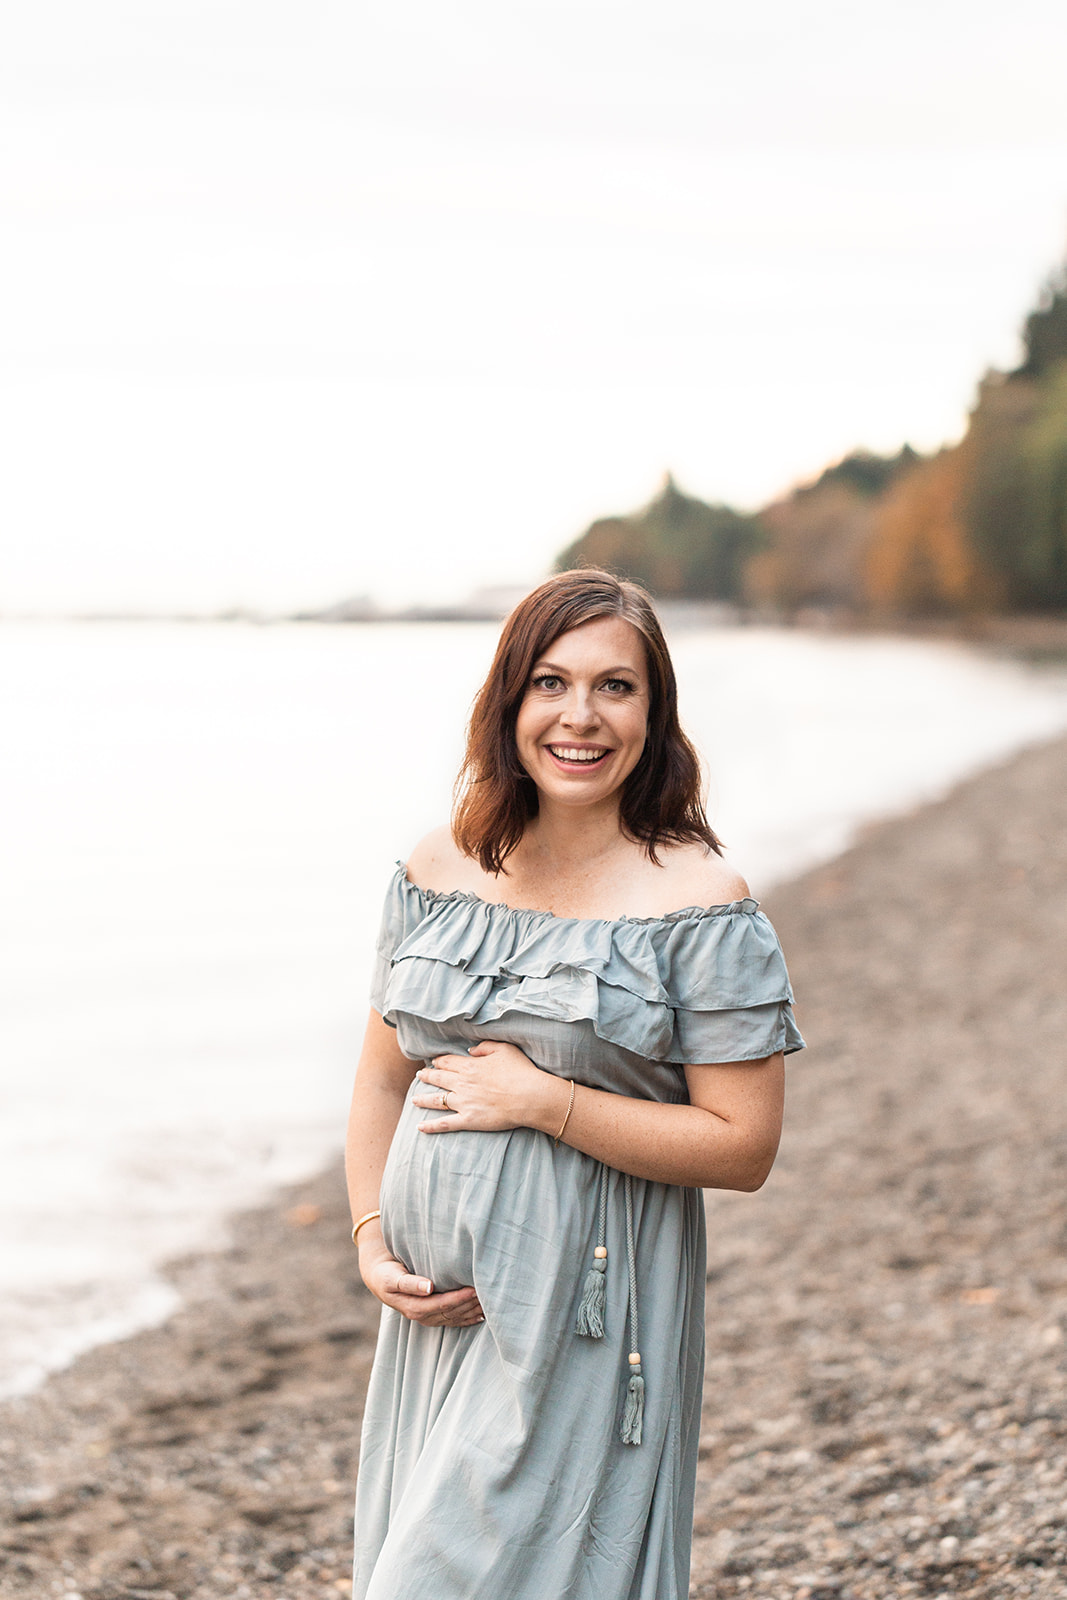 A mother to be in a blue maternity dress stands on a beach holding her bump